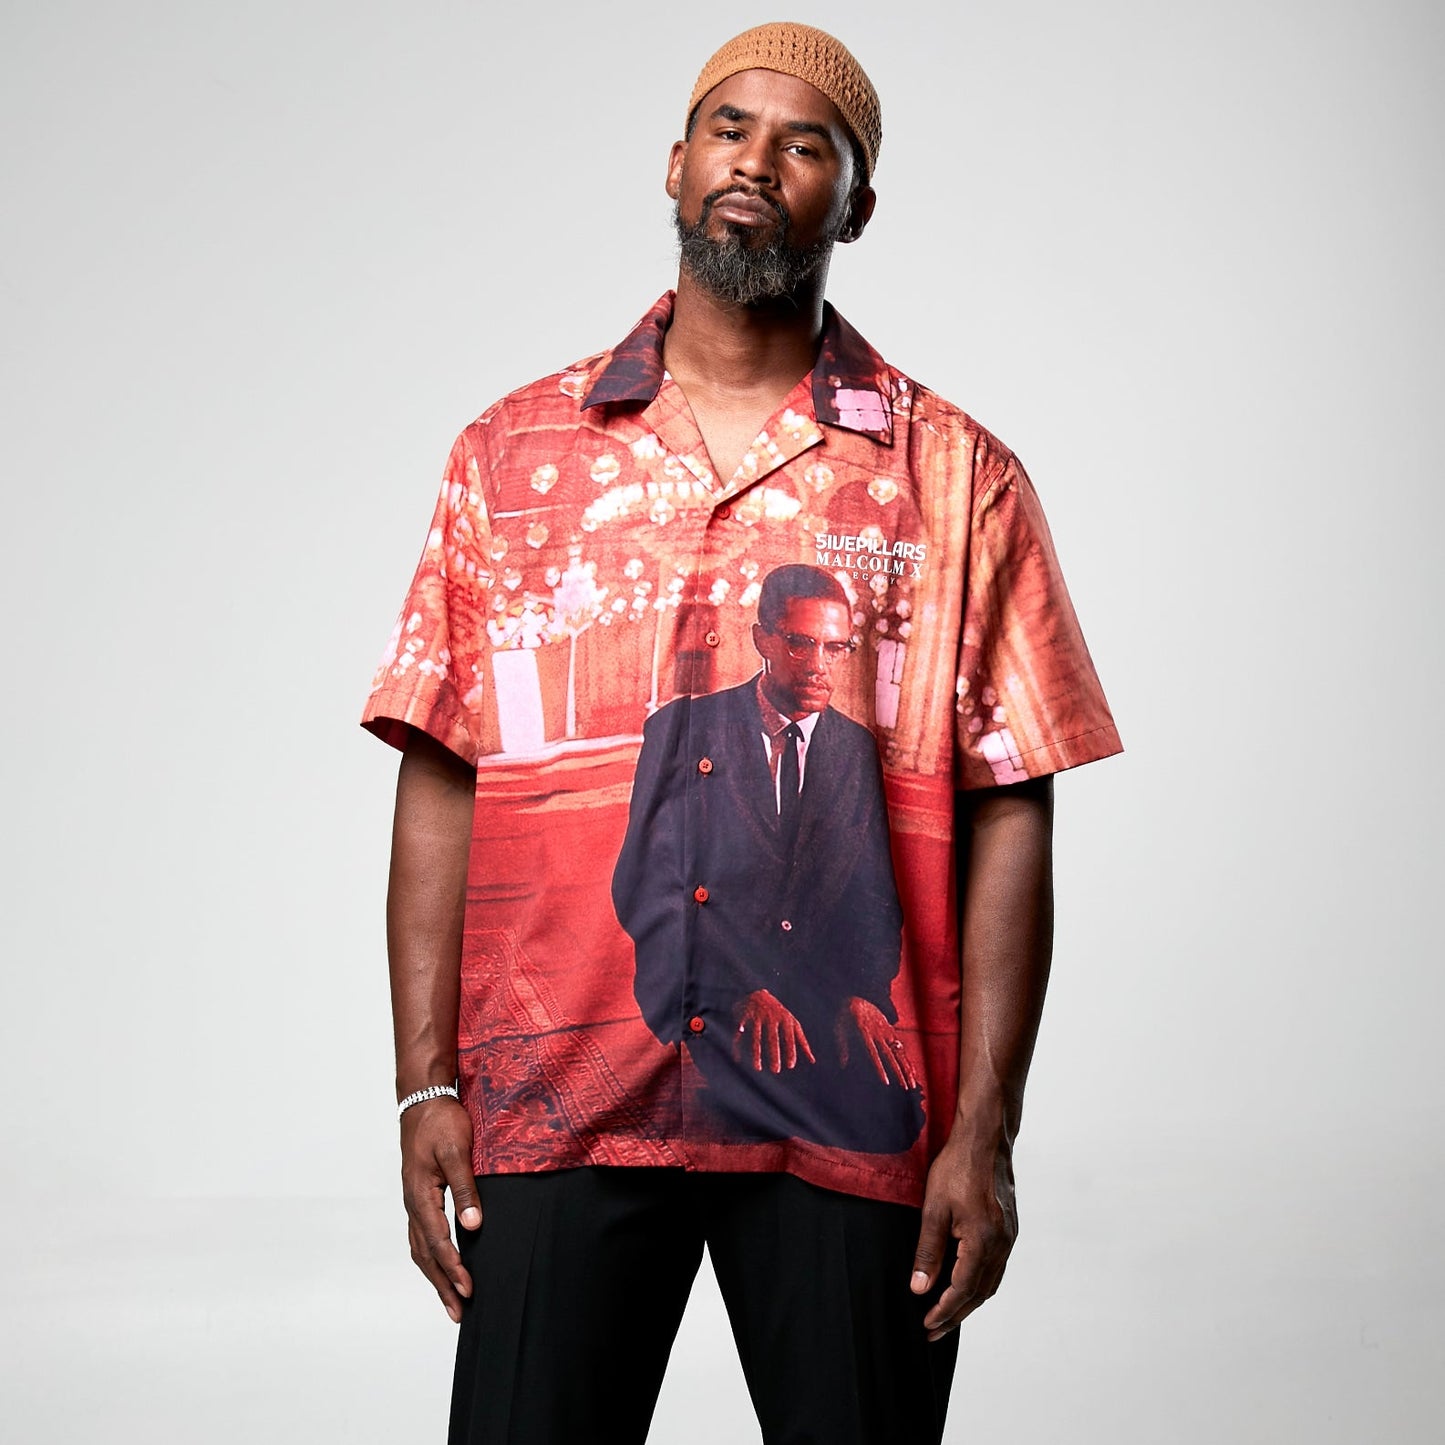 Malcolm X Button Up